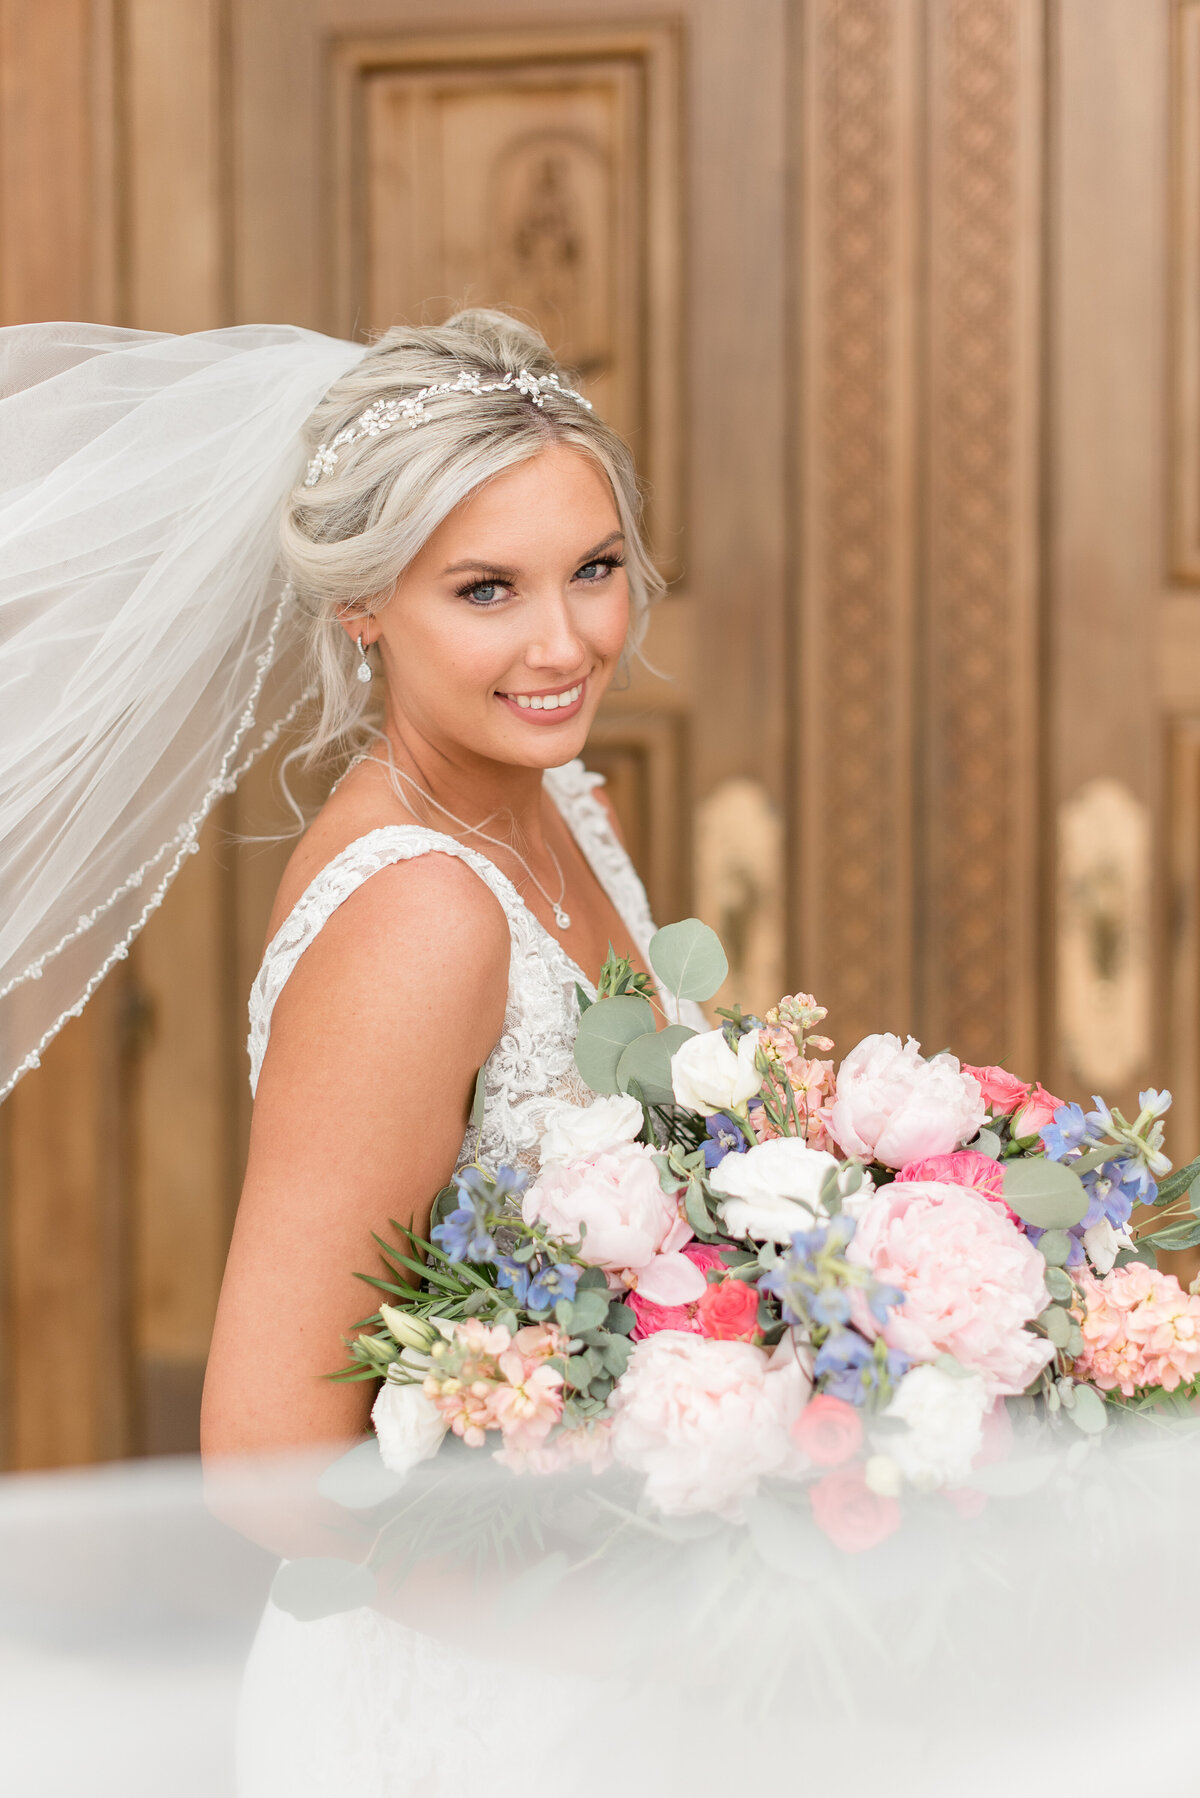 Bride smiling at camera and holding large colorful bouquet filled with peonies, roses, eucalyptus and other flowers.